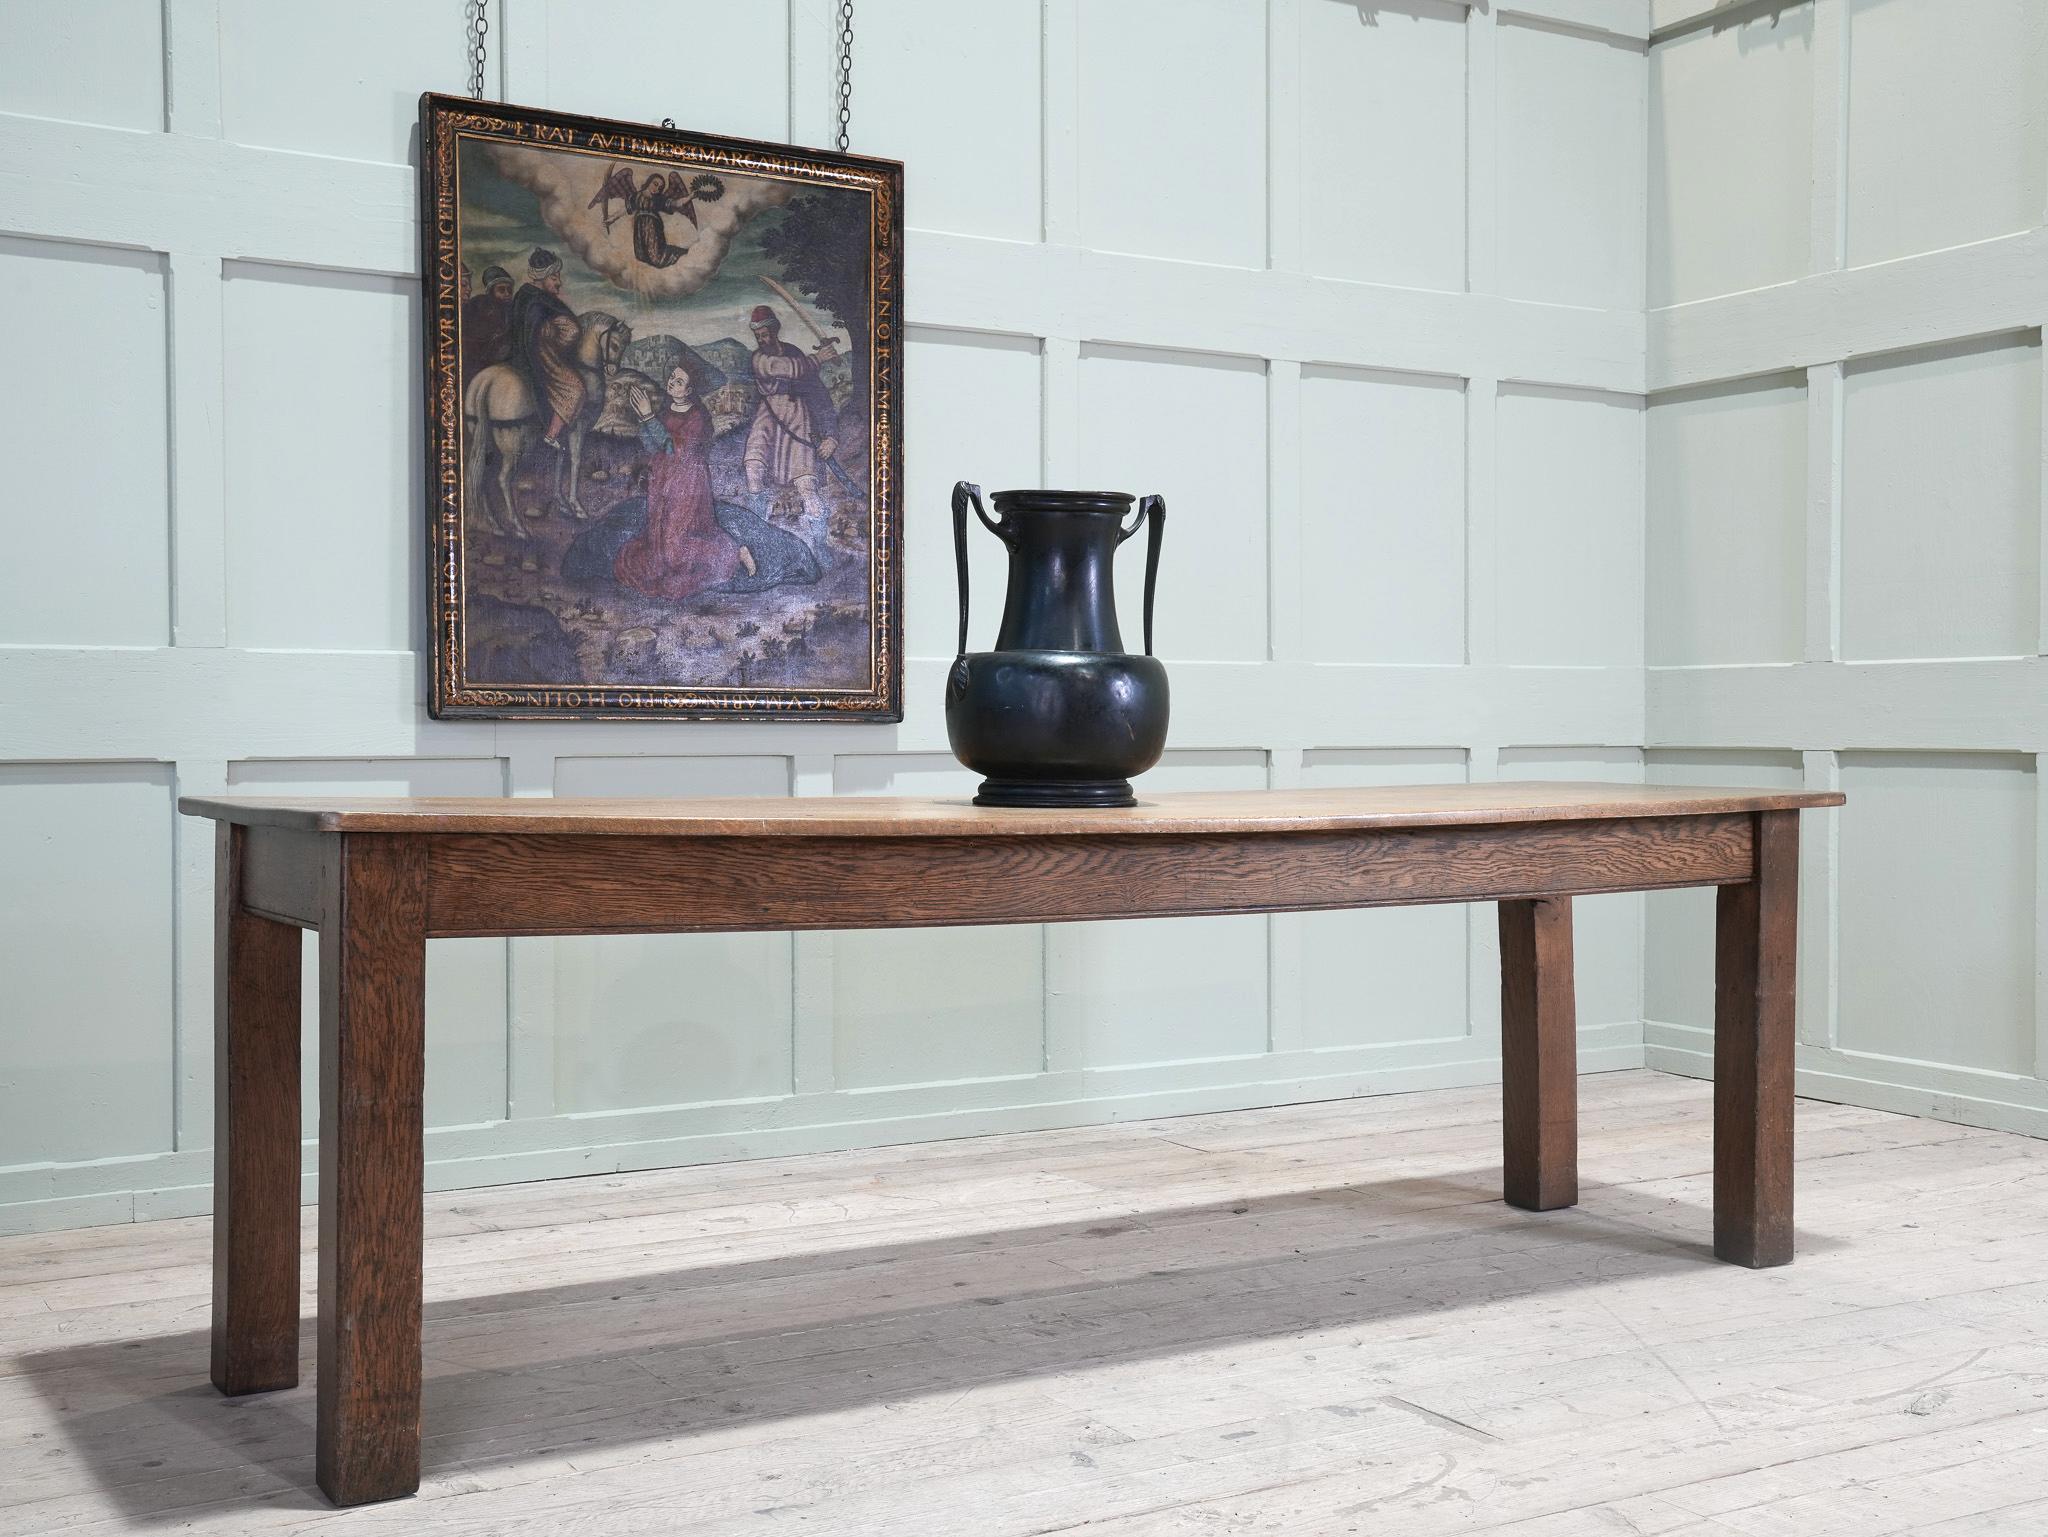 20th Century A 1920s Oak Refectory Table